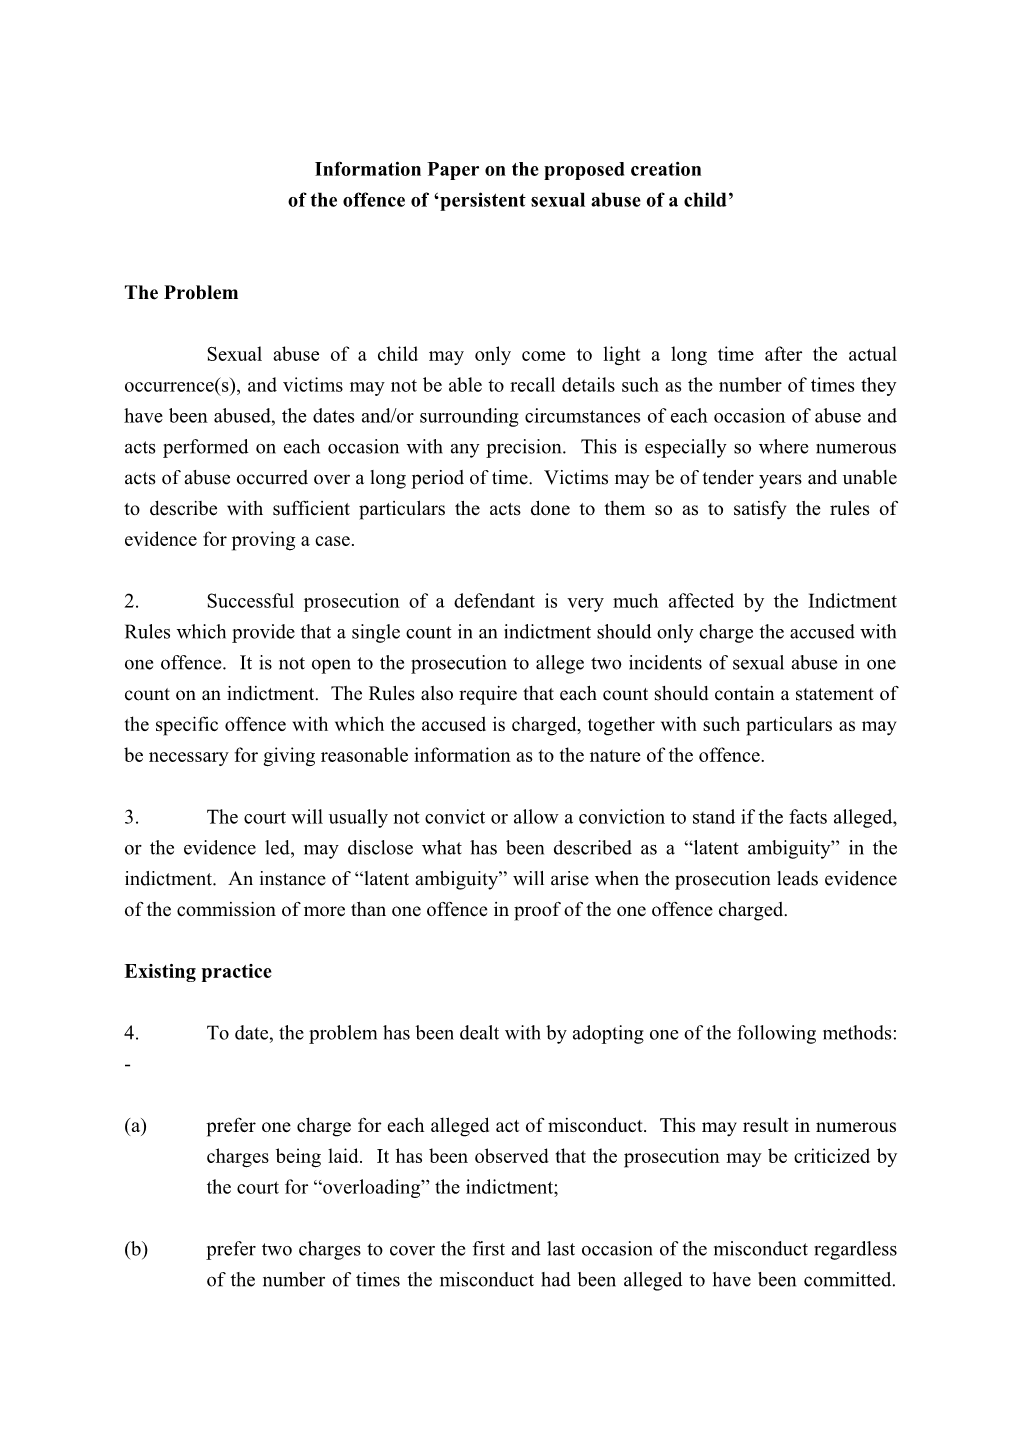 Information Paper on the Proposed Creation